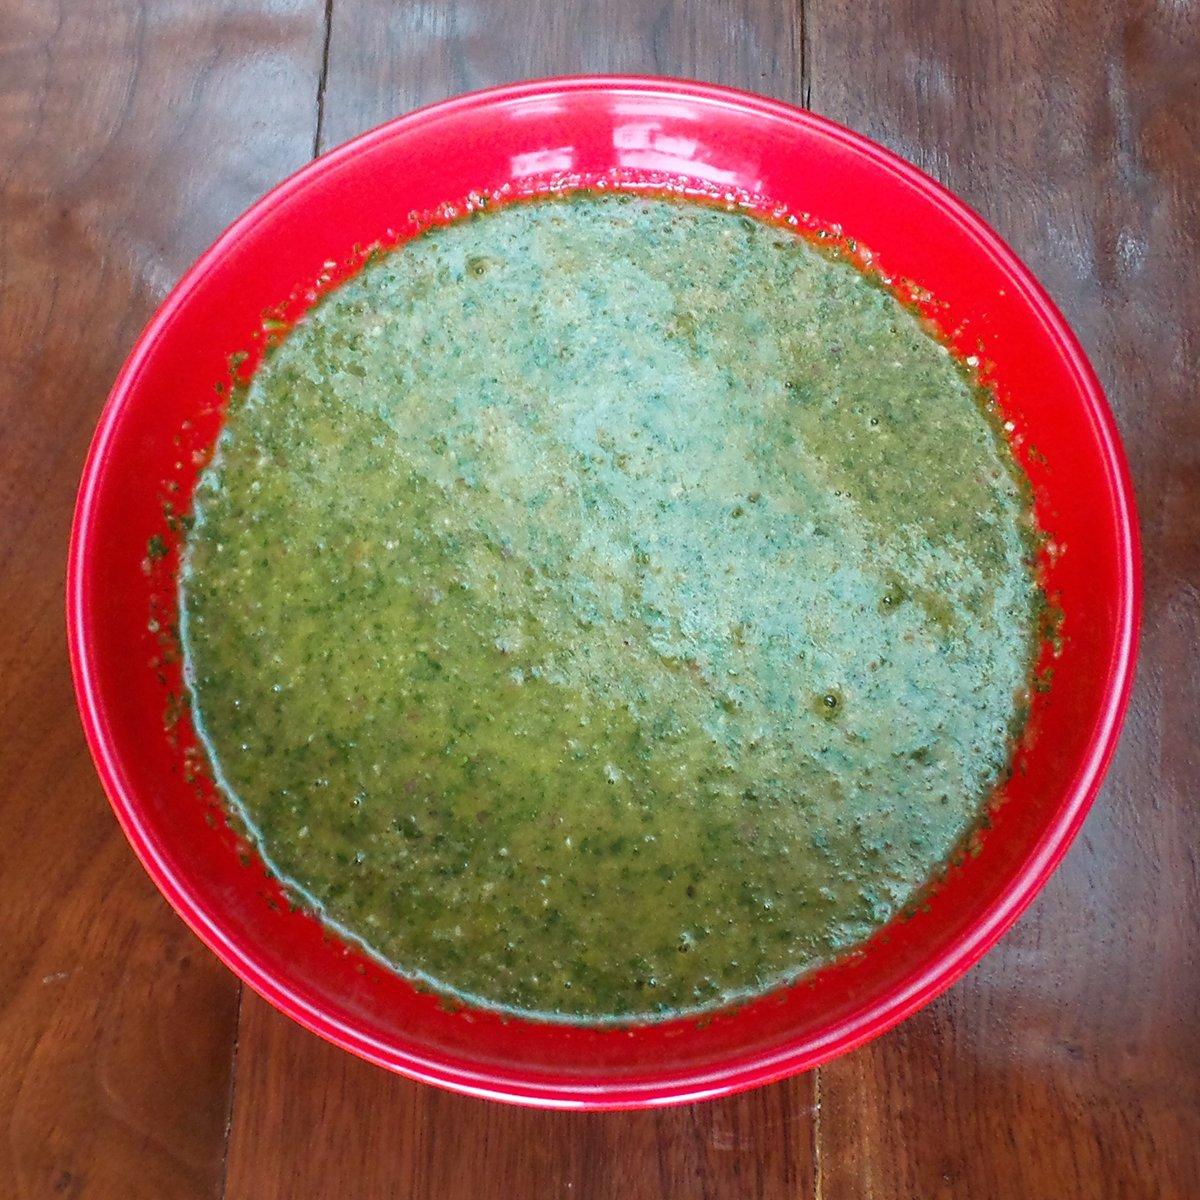 Chimichurri sauce is easy to make and taste great on any grilled meat or fish.